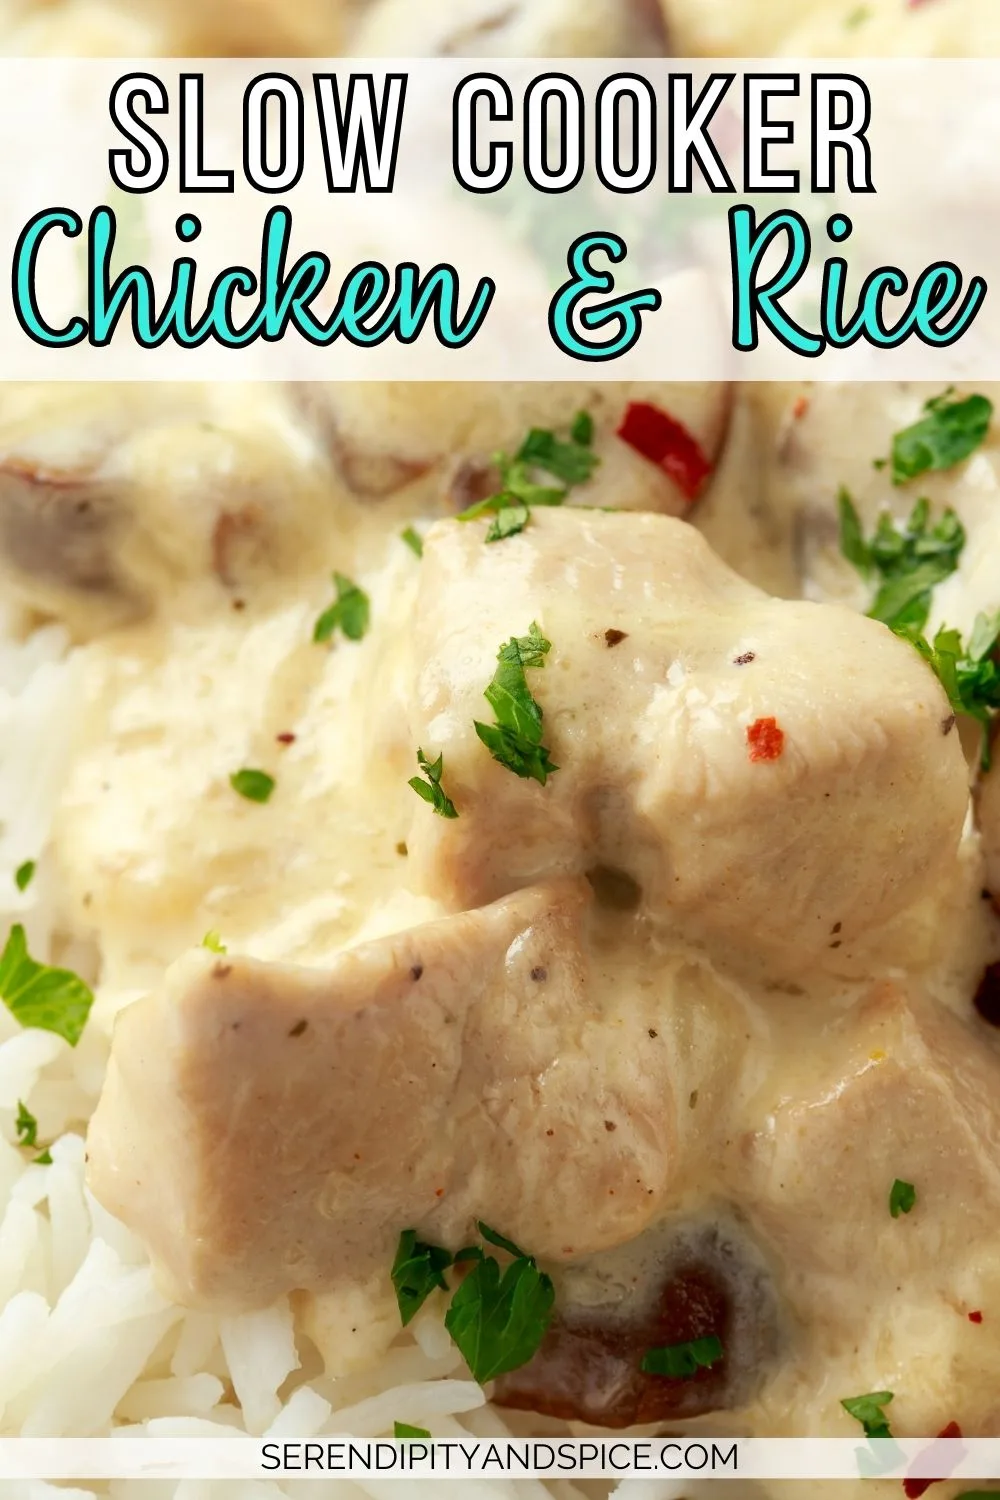 Easy Chicken and Rice Recipe - Creamy Oven Baked Chicken Casserole